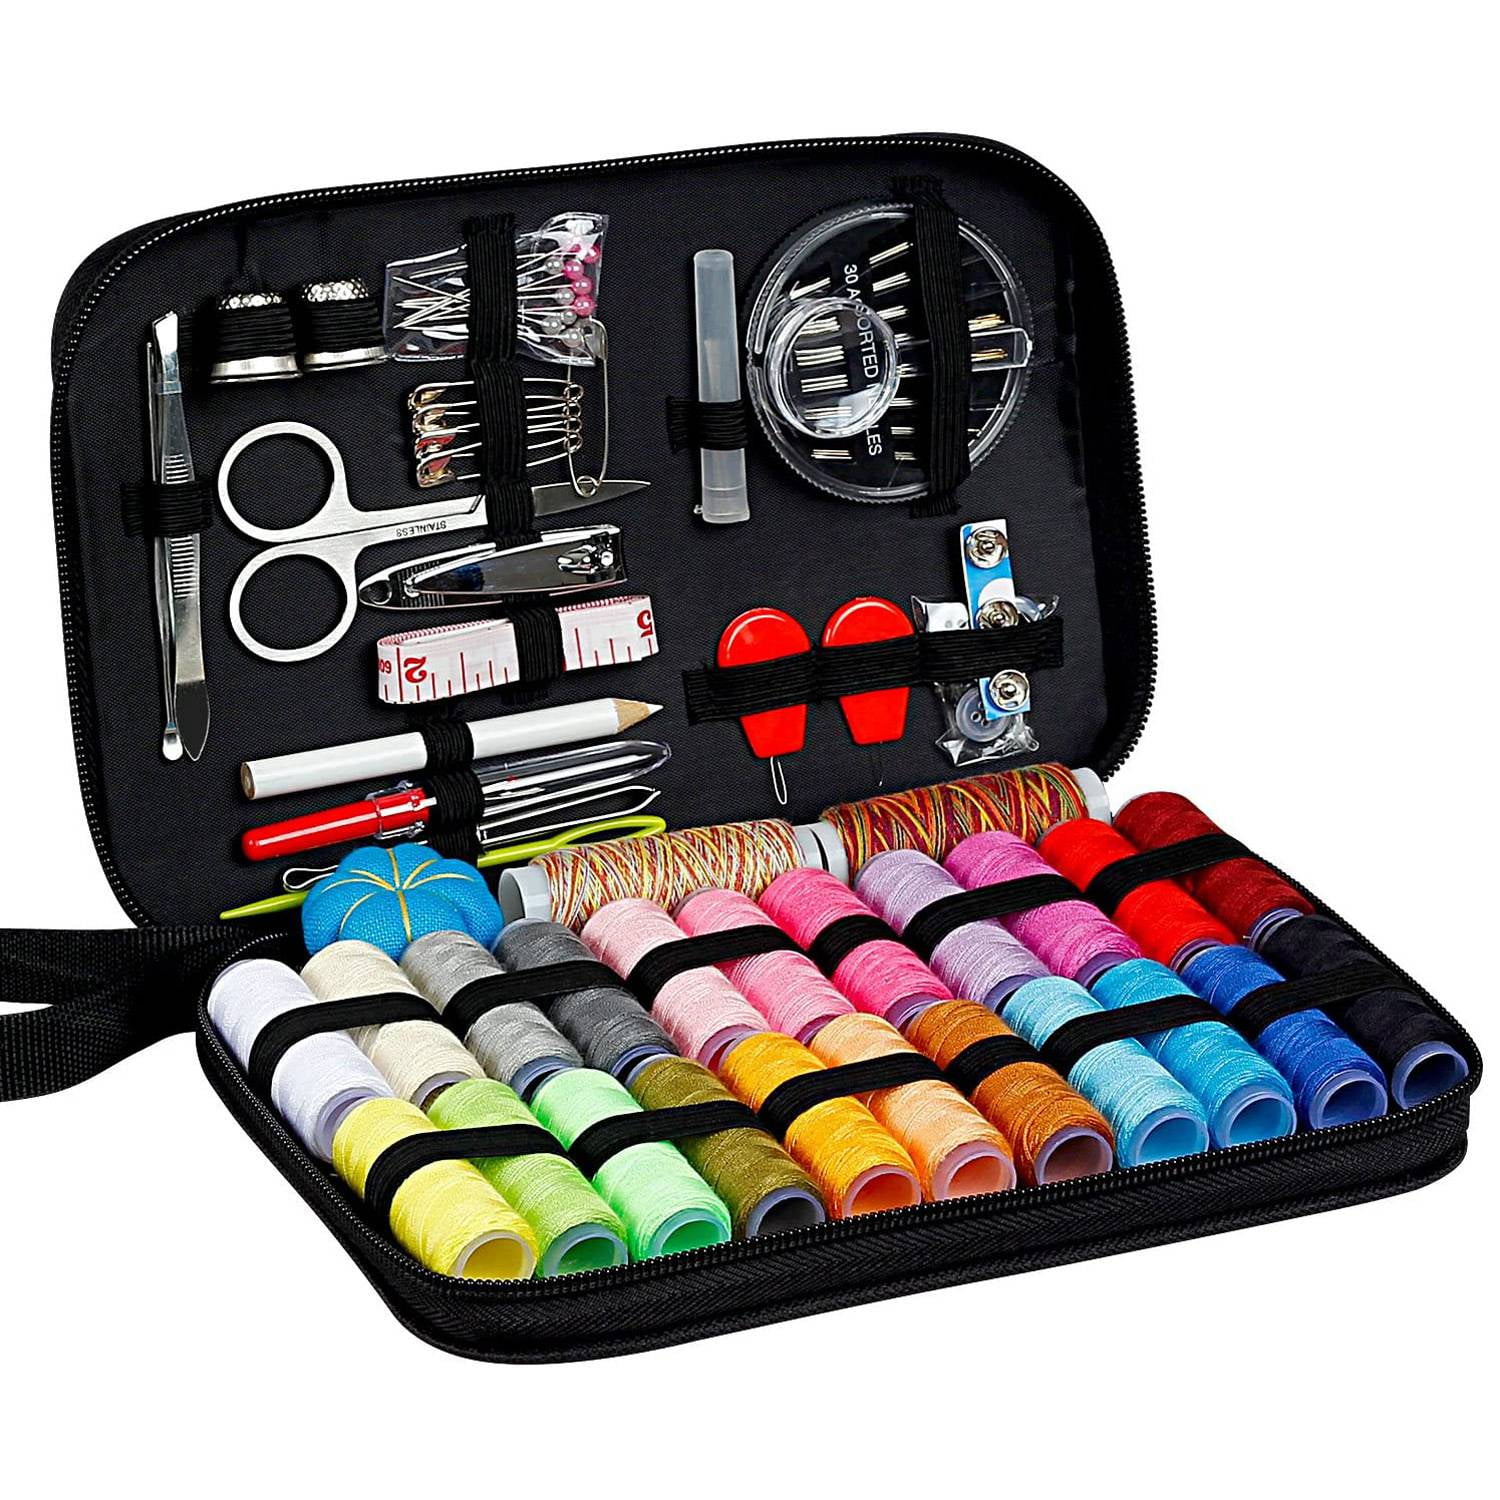 Portable Travel Home Sewing Kit Case Needle Thread Tape Scissor Button Hand G6R7 